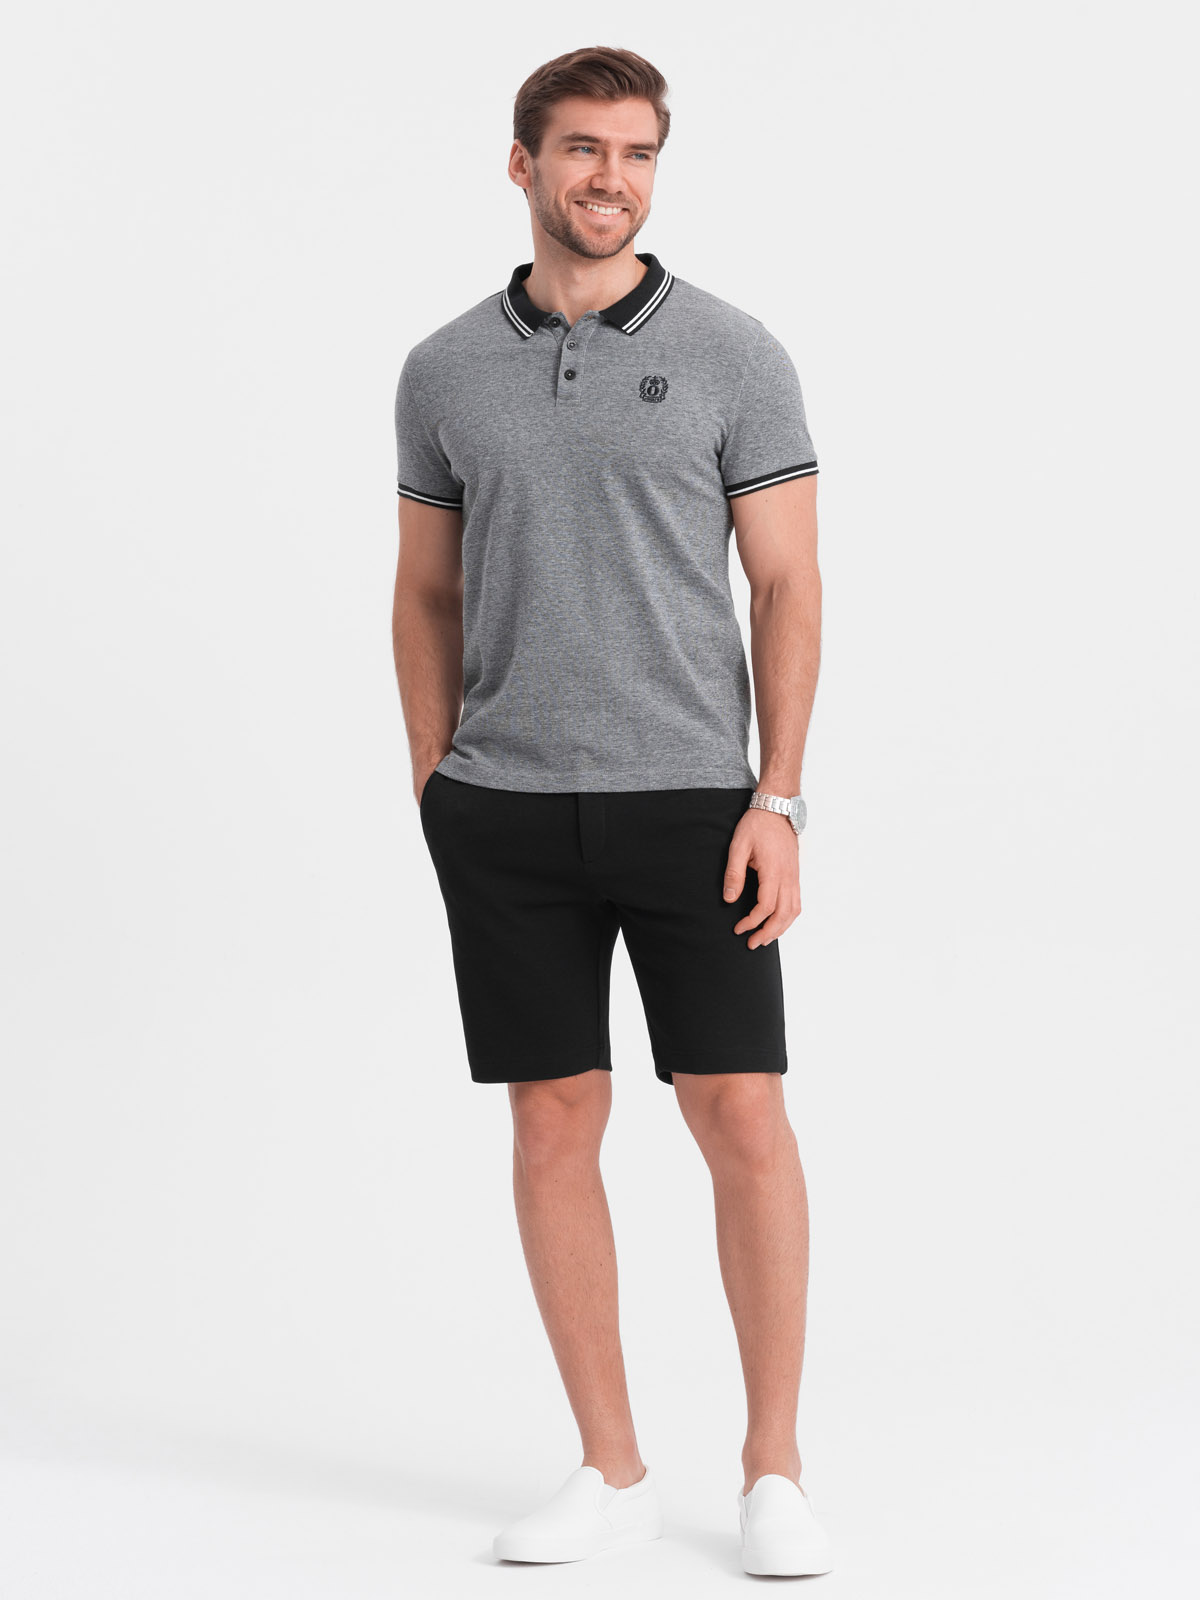 Ombre Men's SLIM FIT shorts in structured knit fabric - black